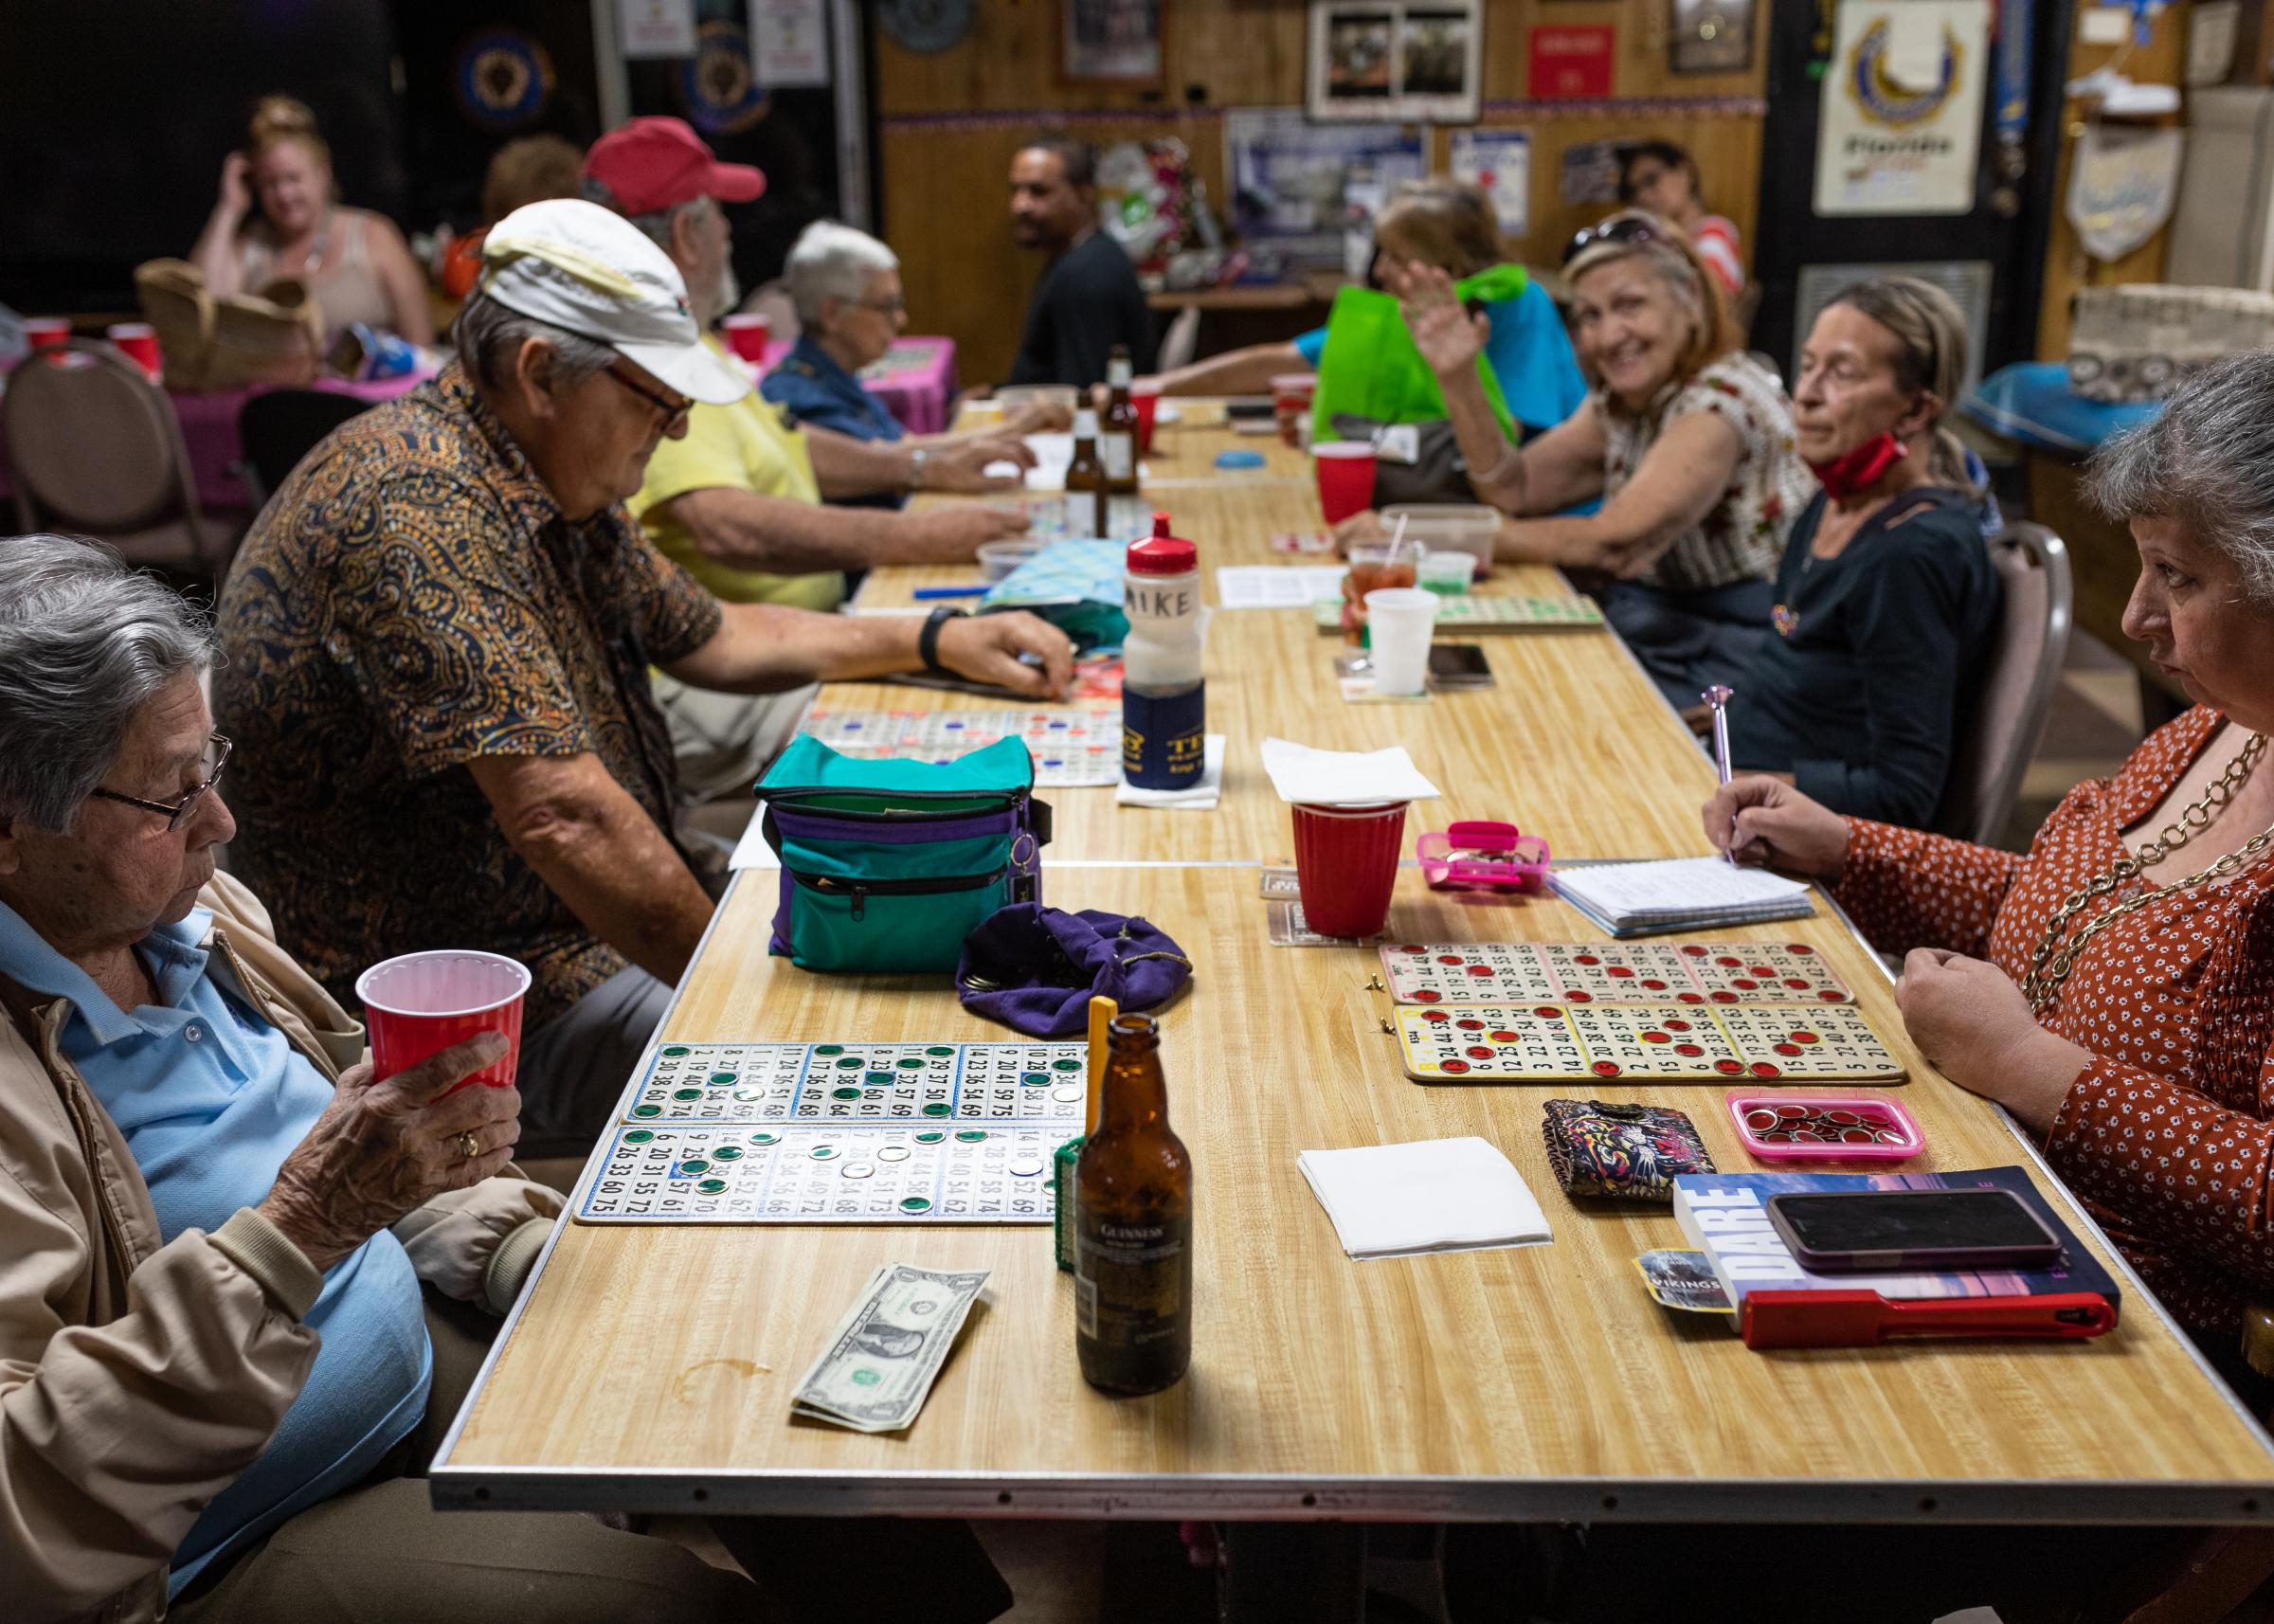 Post 67 - Thursday night bingo is a pretty serious affair for the regulars.